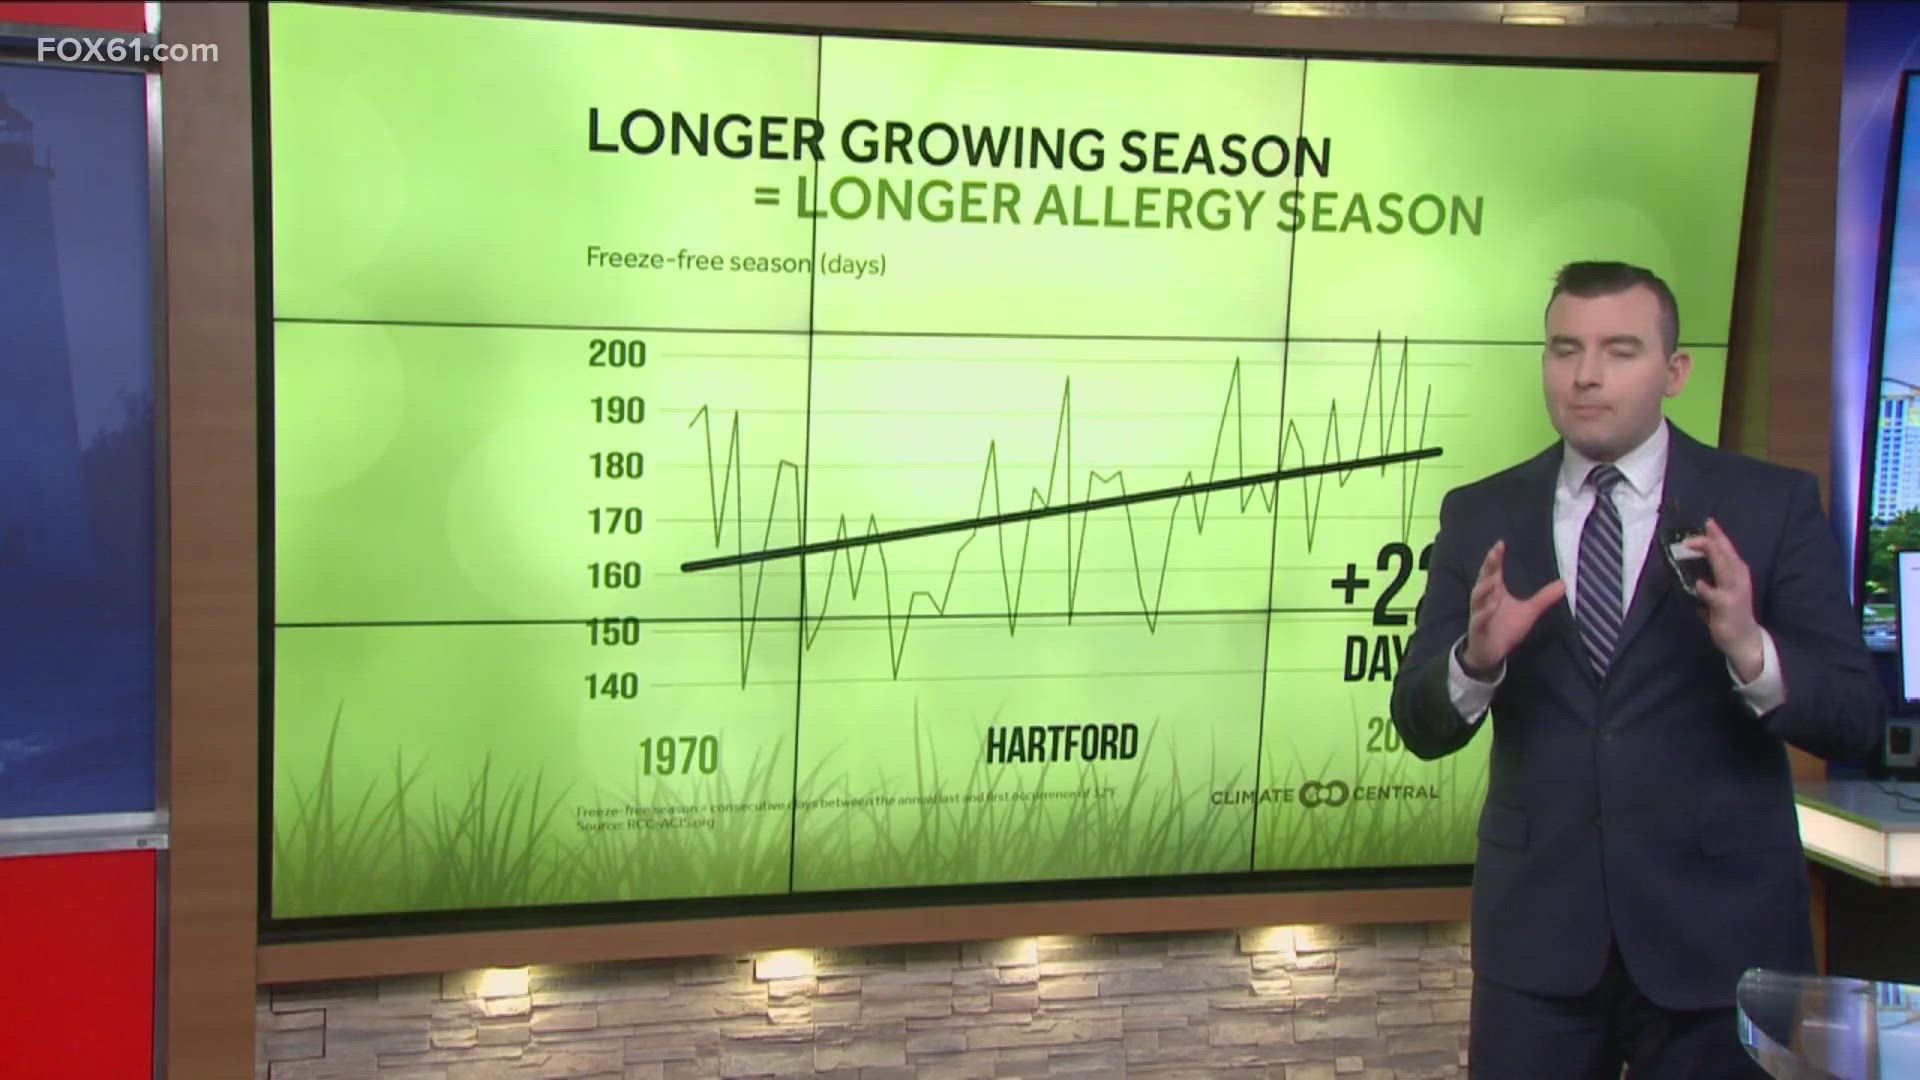 A longer growing season also means a longer allergy season, with tree pollens beginning earlier and ragweed lasting longer into the fall.